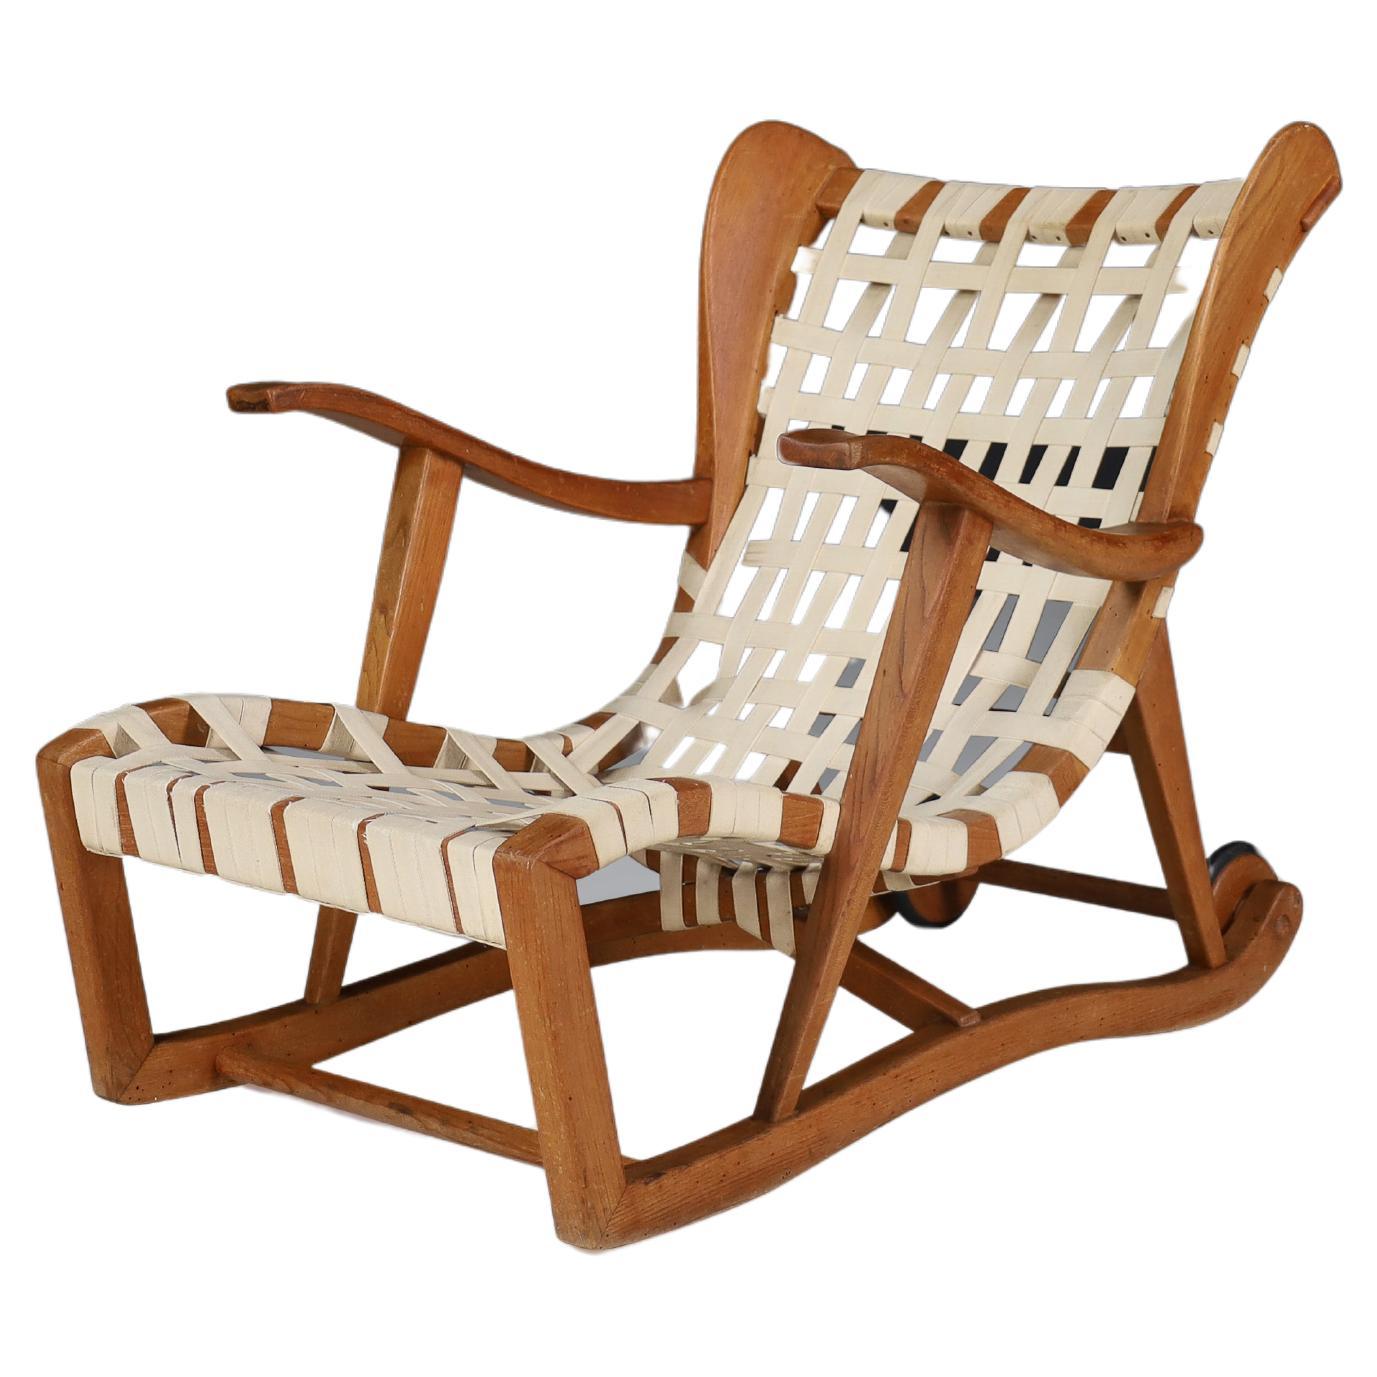 Sculptural Oak Lounge Chair by Guglielmo Pecorini, Italy, the 1950s For Sale